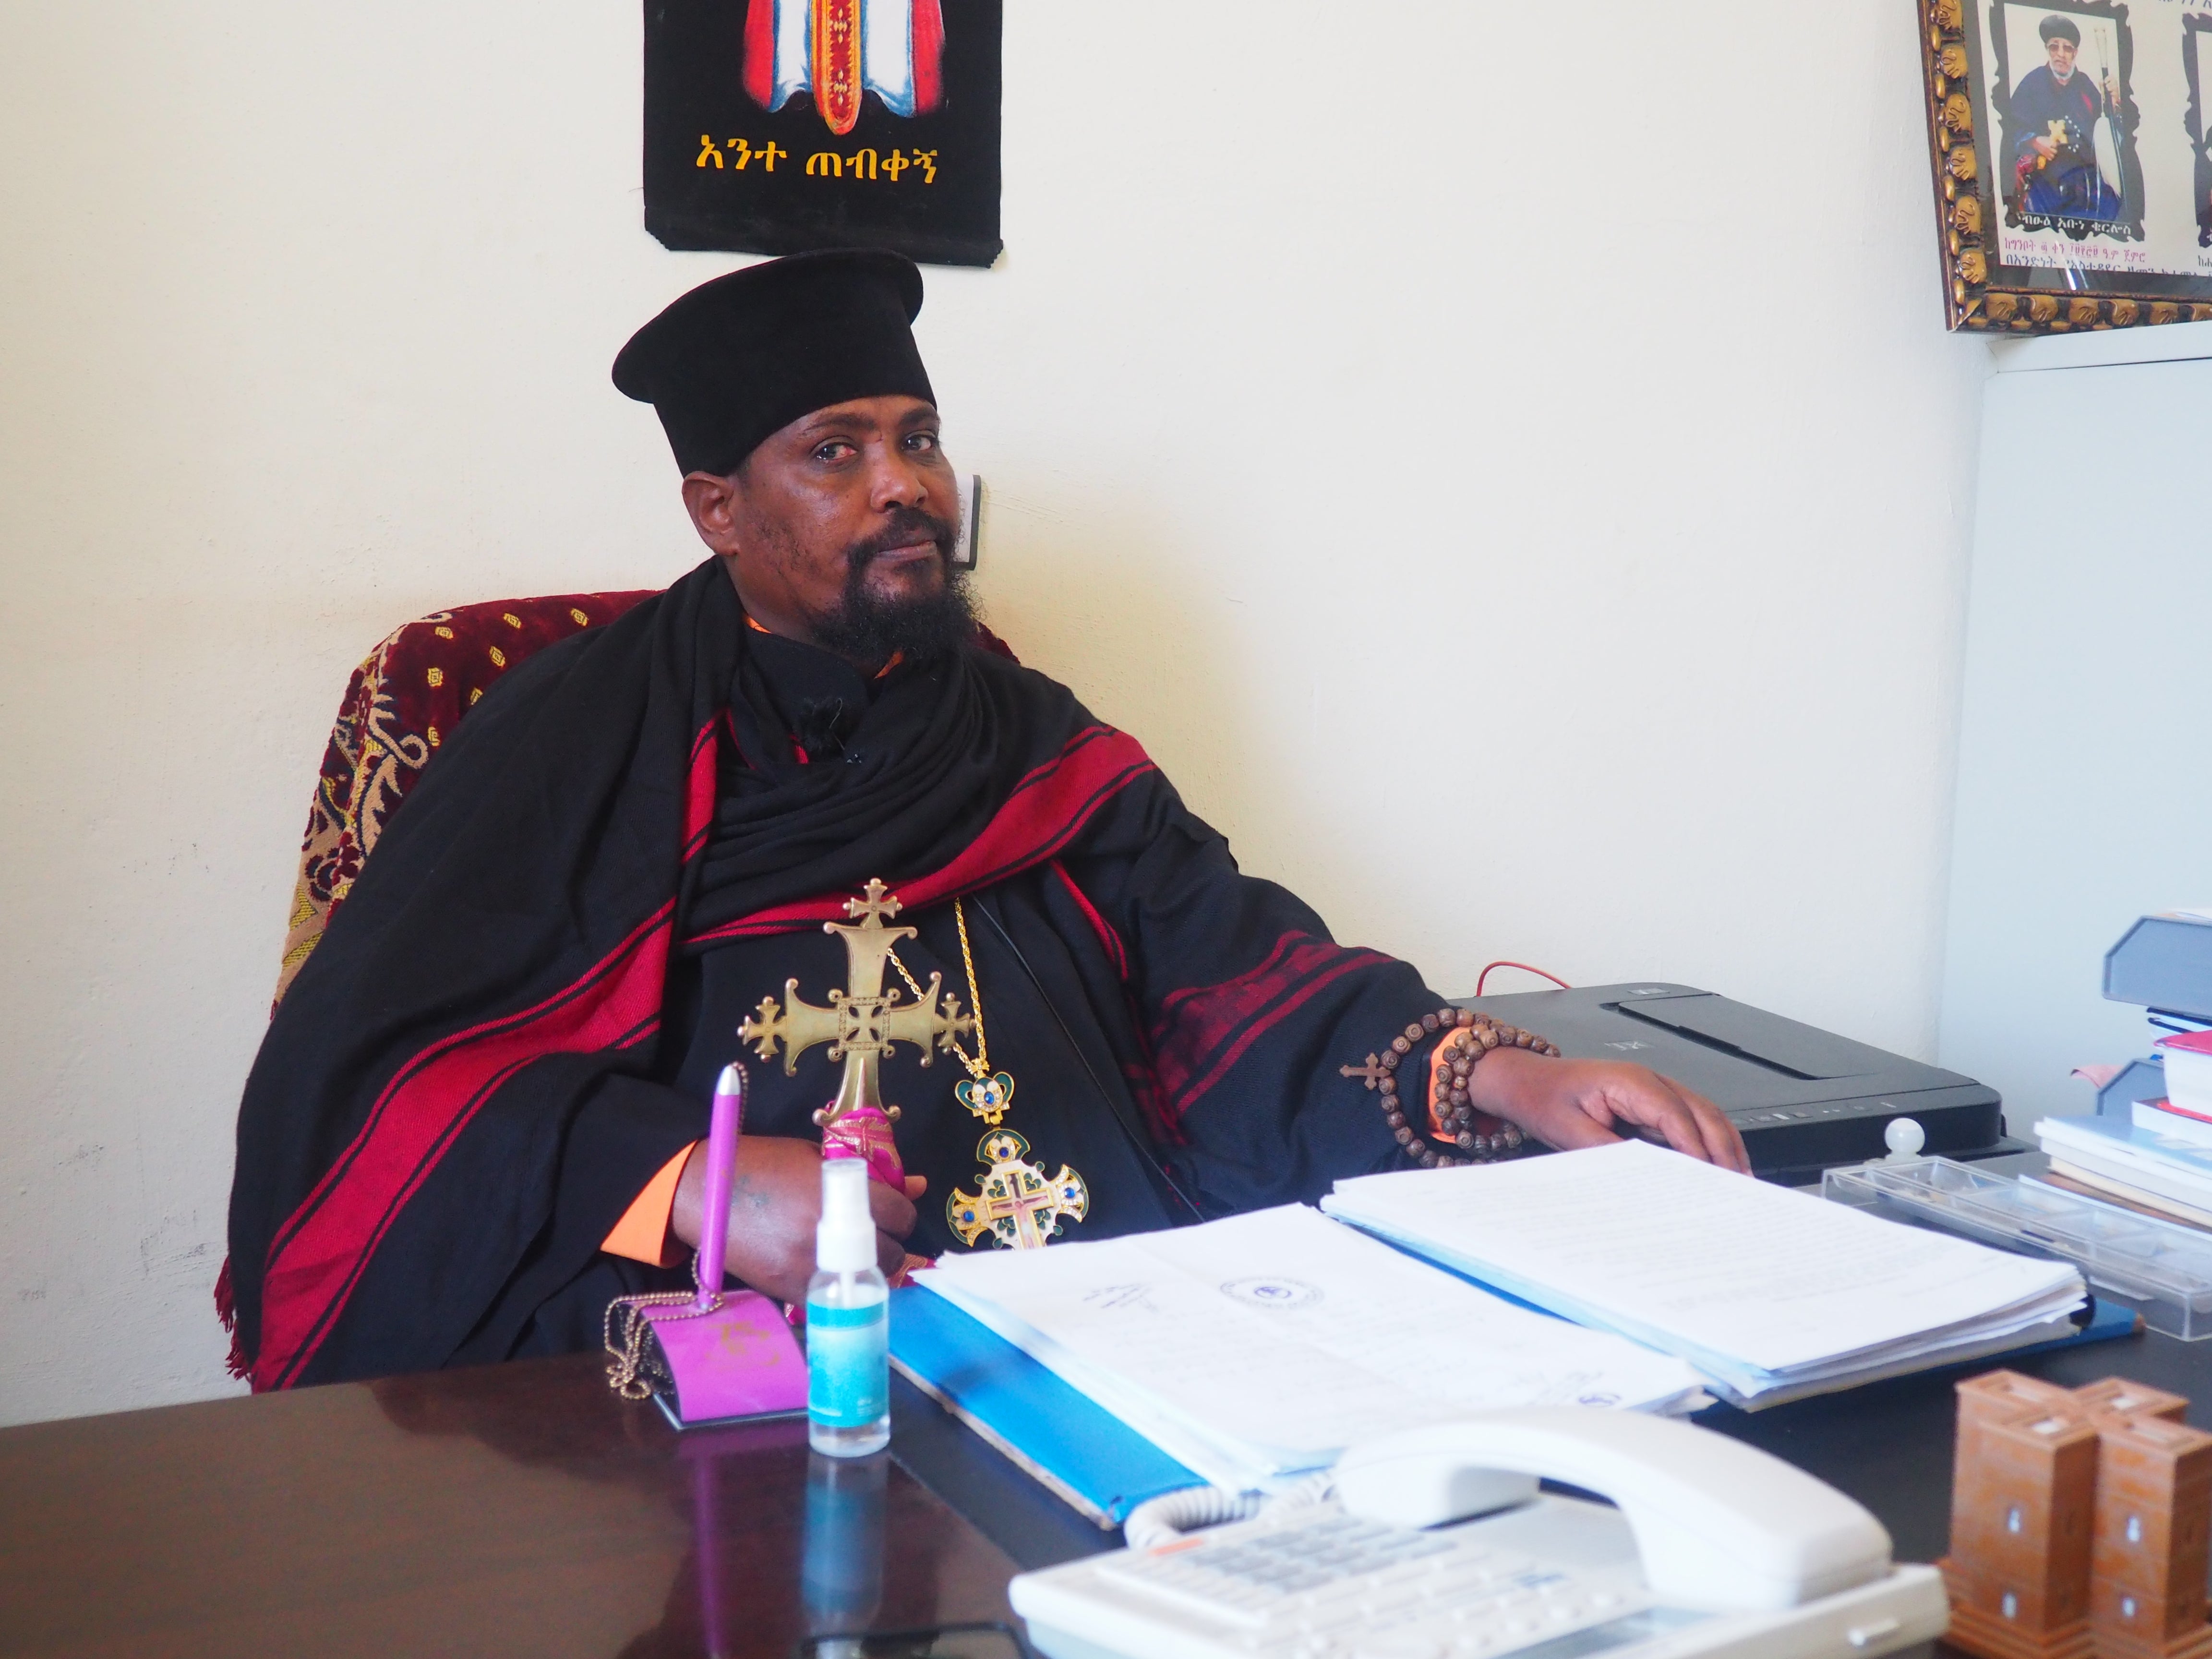 Lalibela’s archbishop Tsige Mezgebu poses for a picture during an interview with The Independent in northern Ethiopia, 27 January 2022